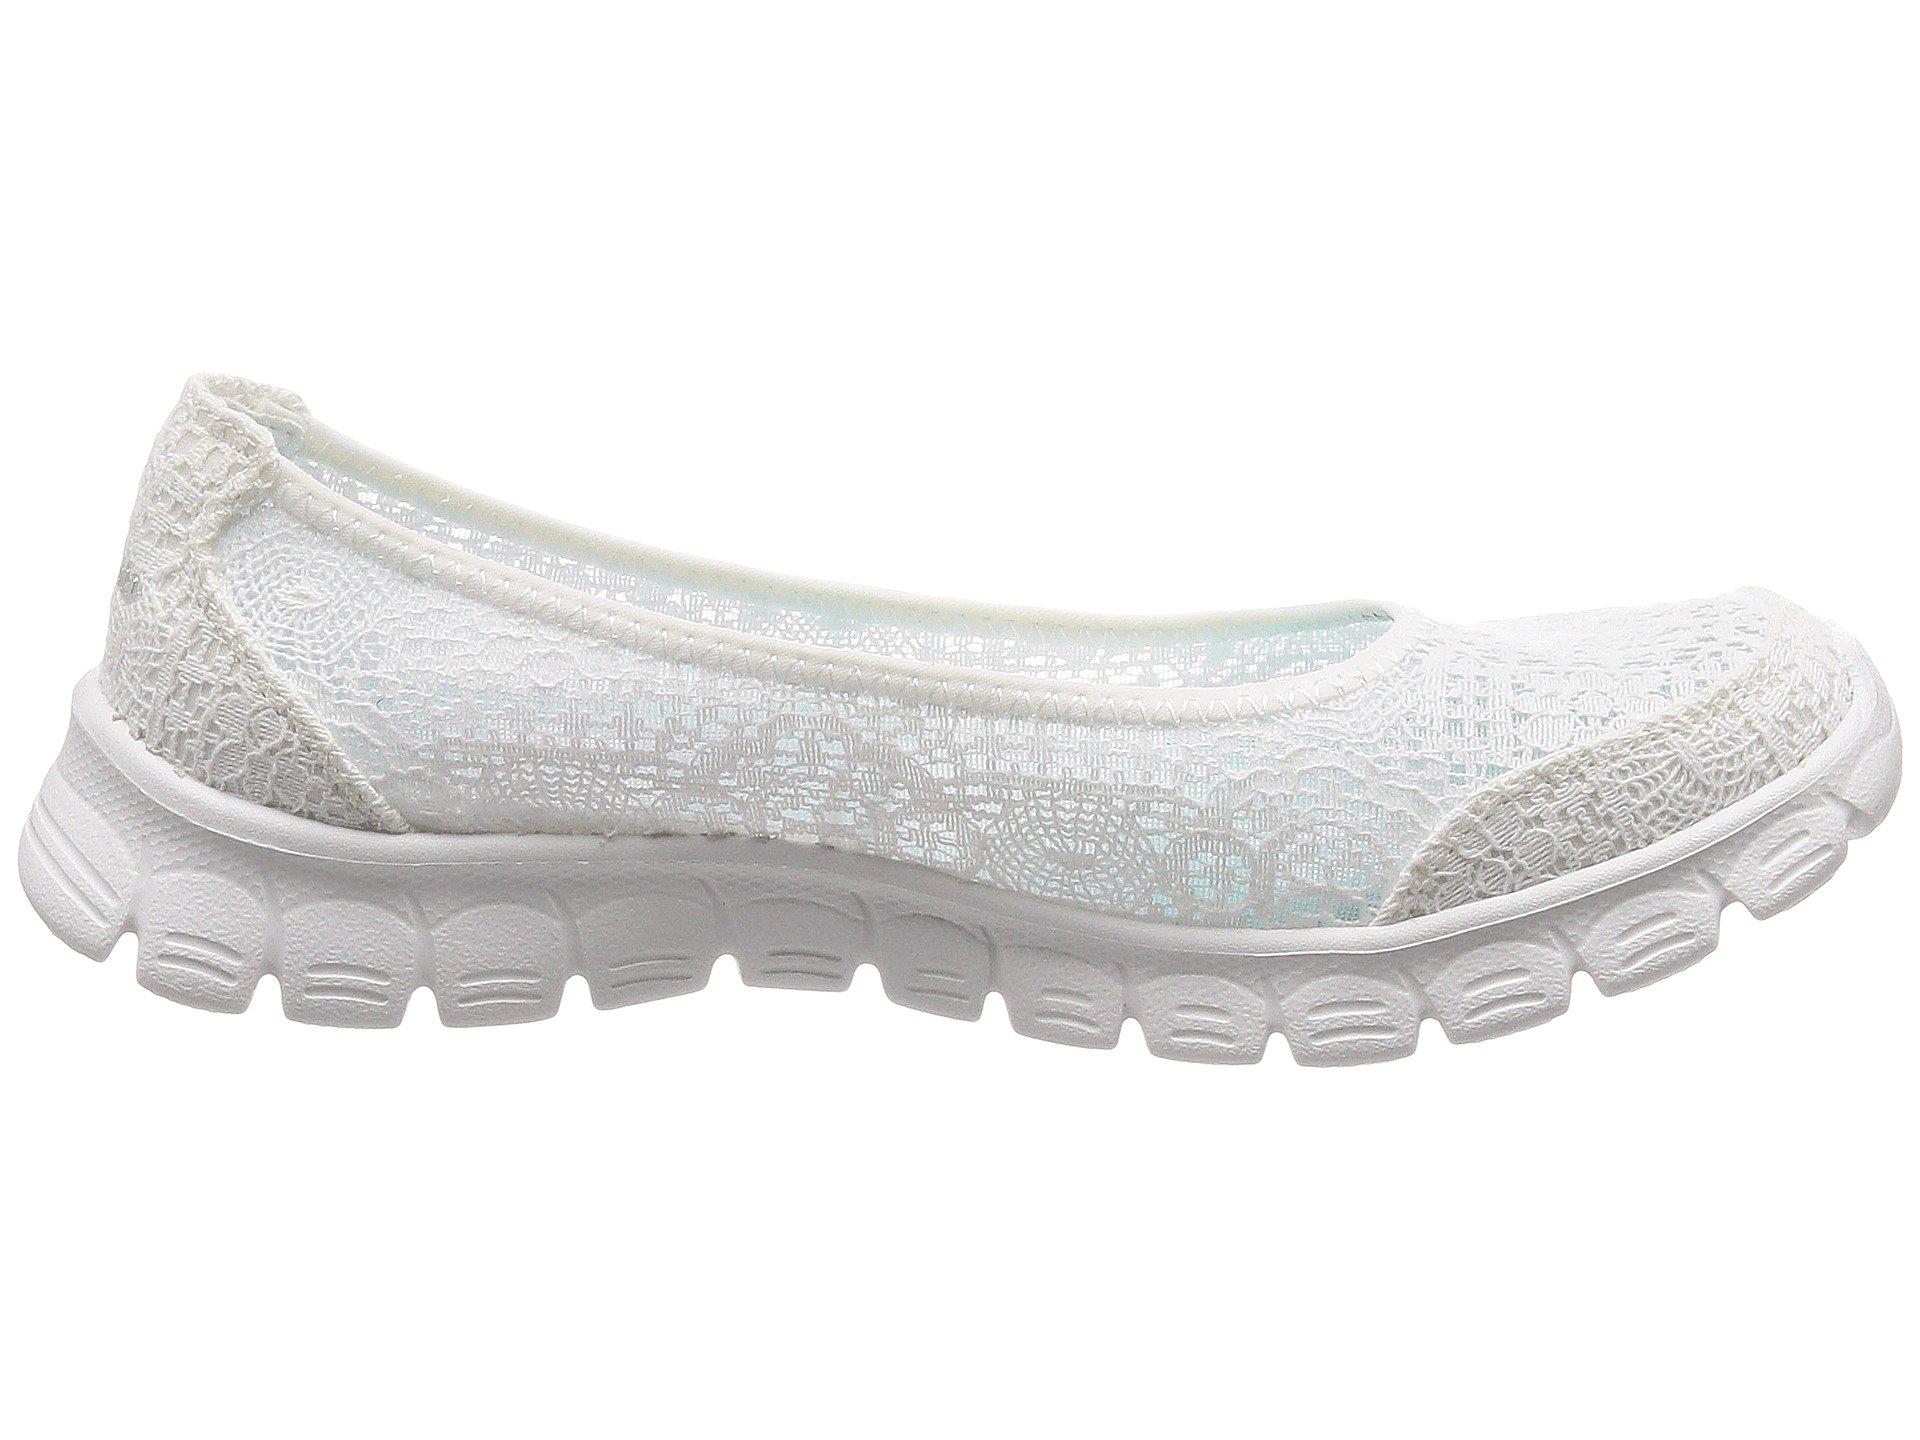 Skechers Lace 23437 Closed Toe Ballet Flats in White - Lyst